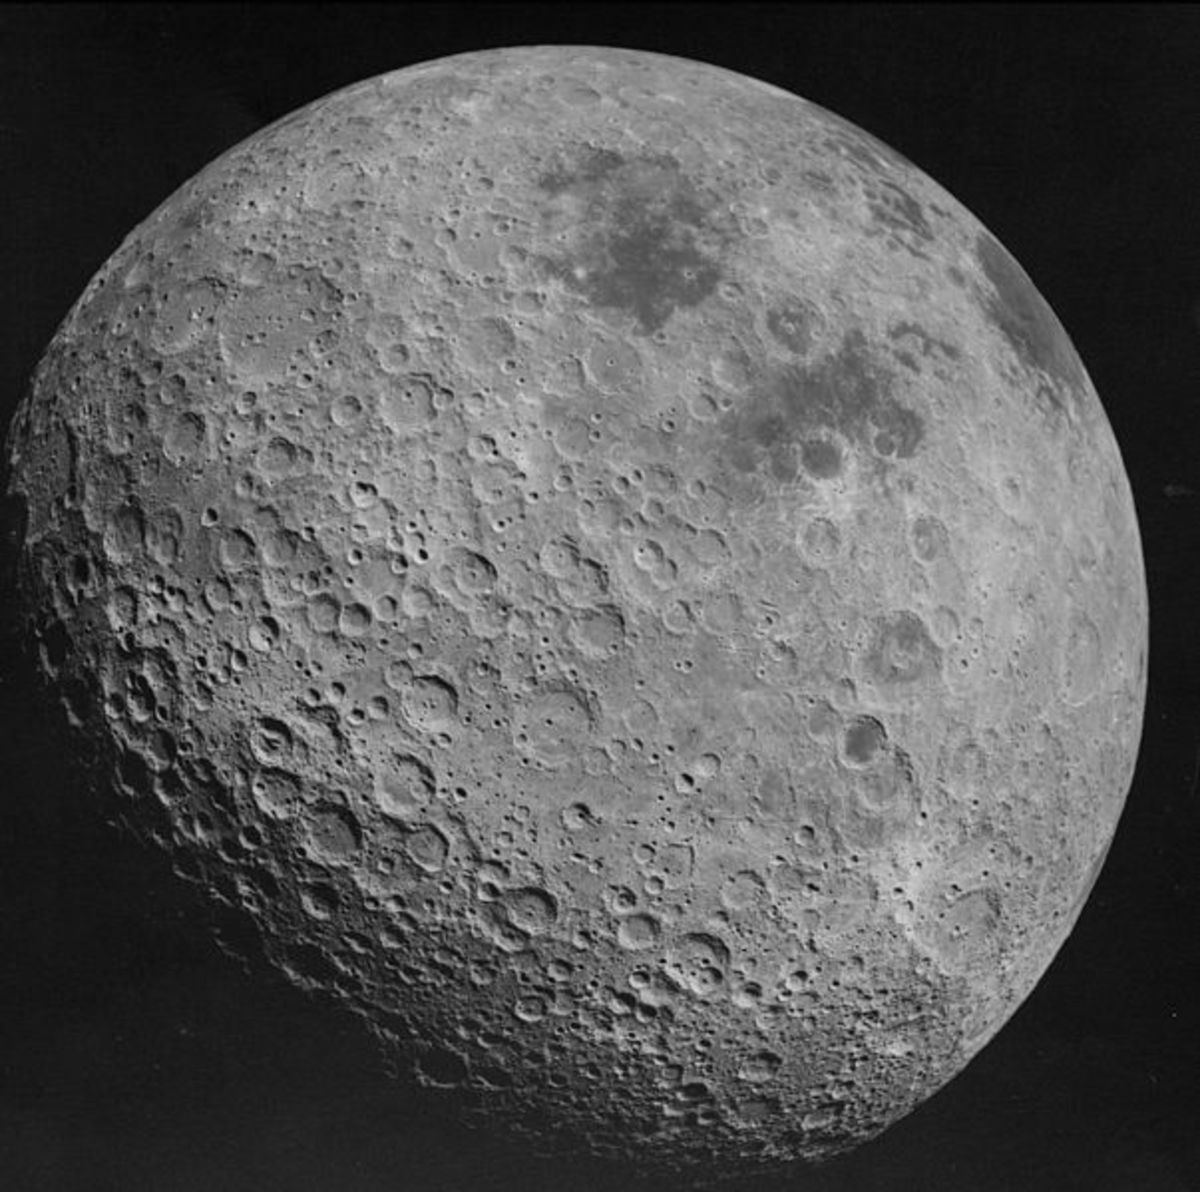 Another view of the far side or the back side of the moon.